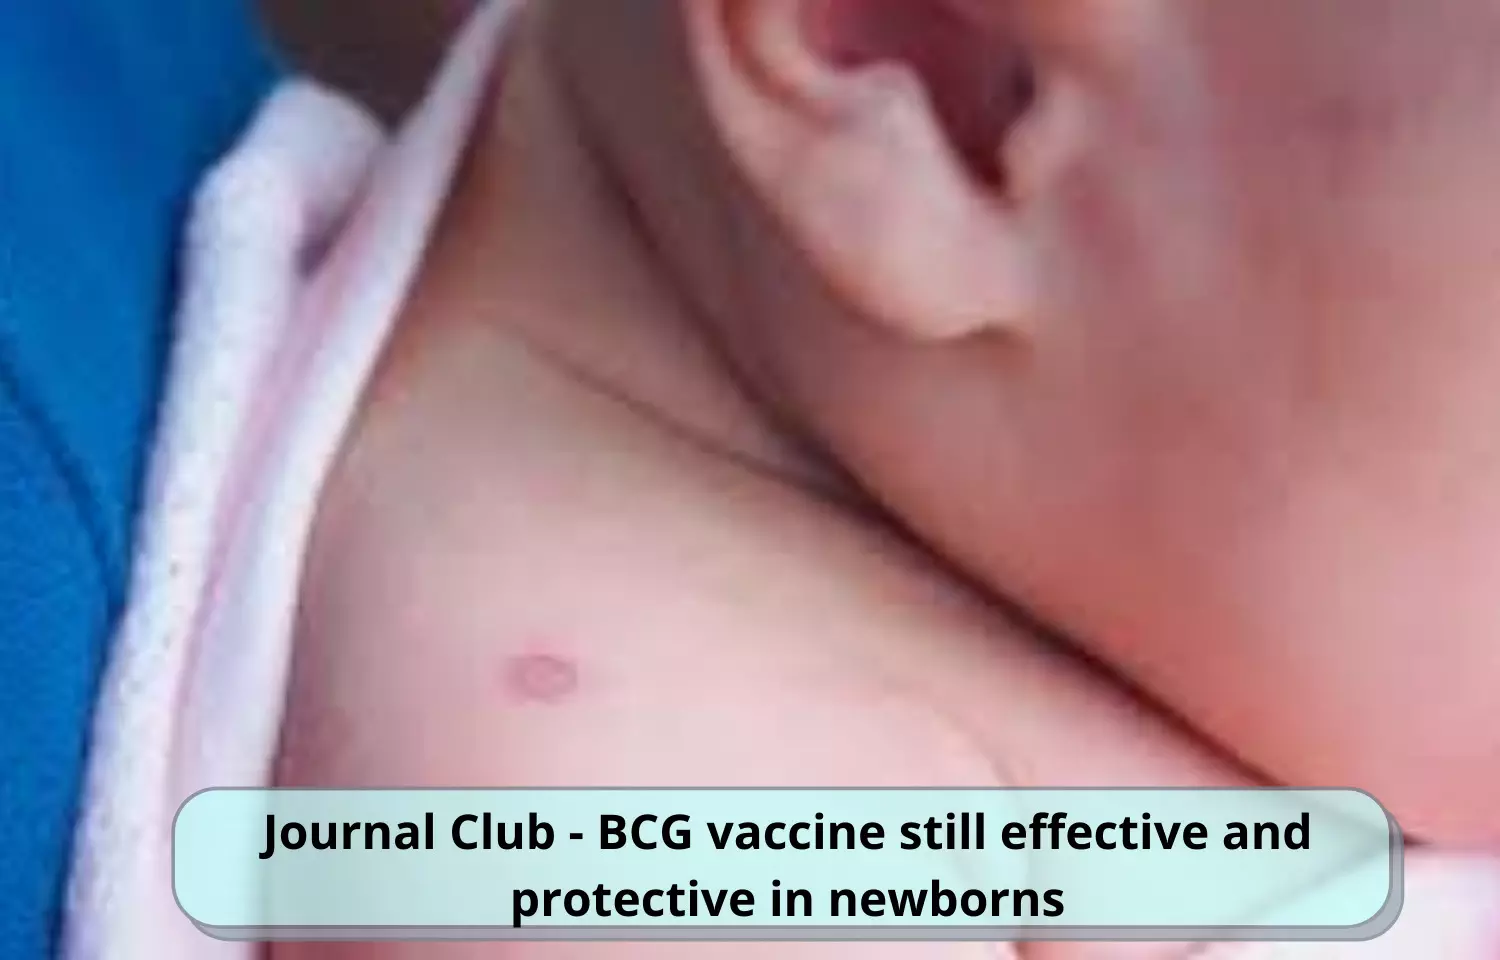 Journal Club - BCG vaccine still effective and protective in newborns